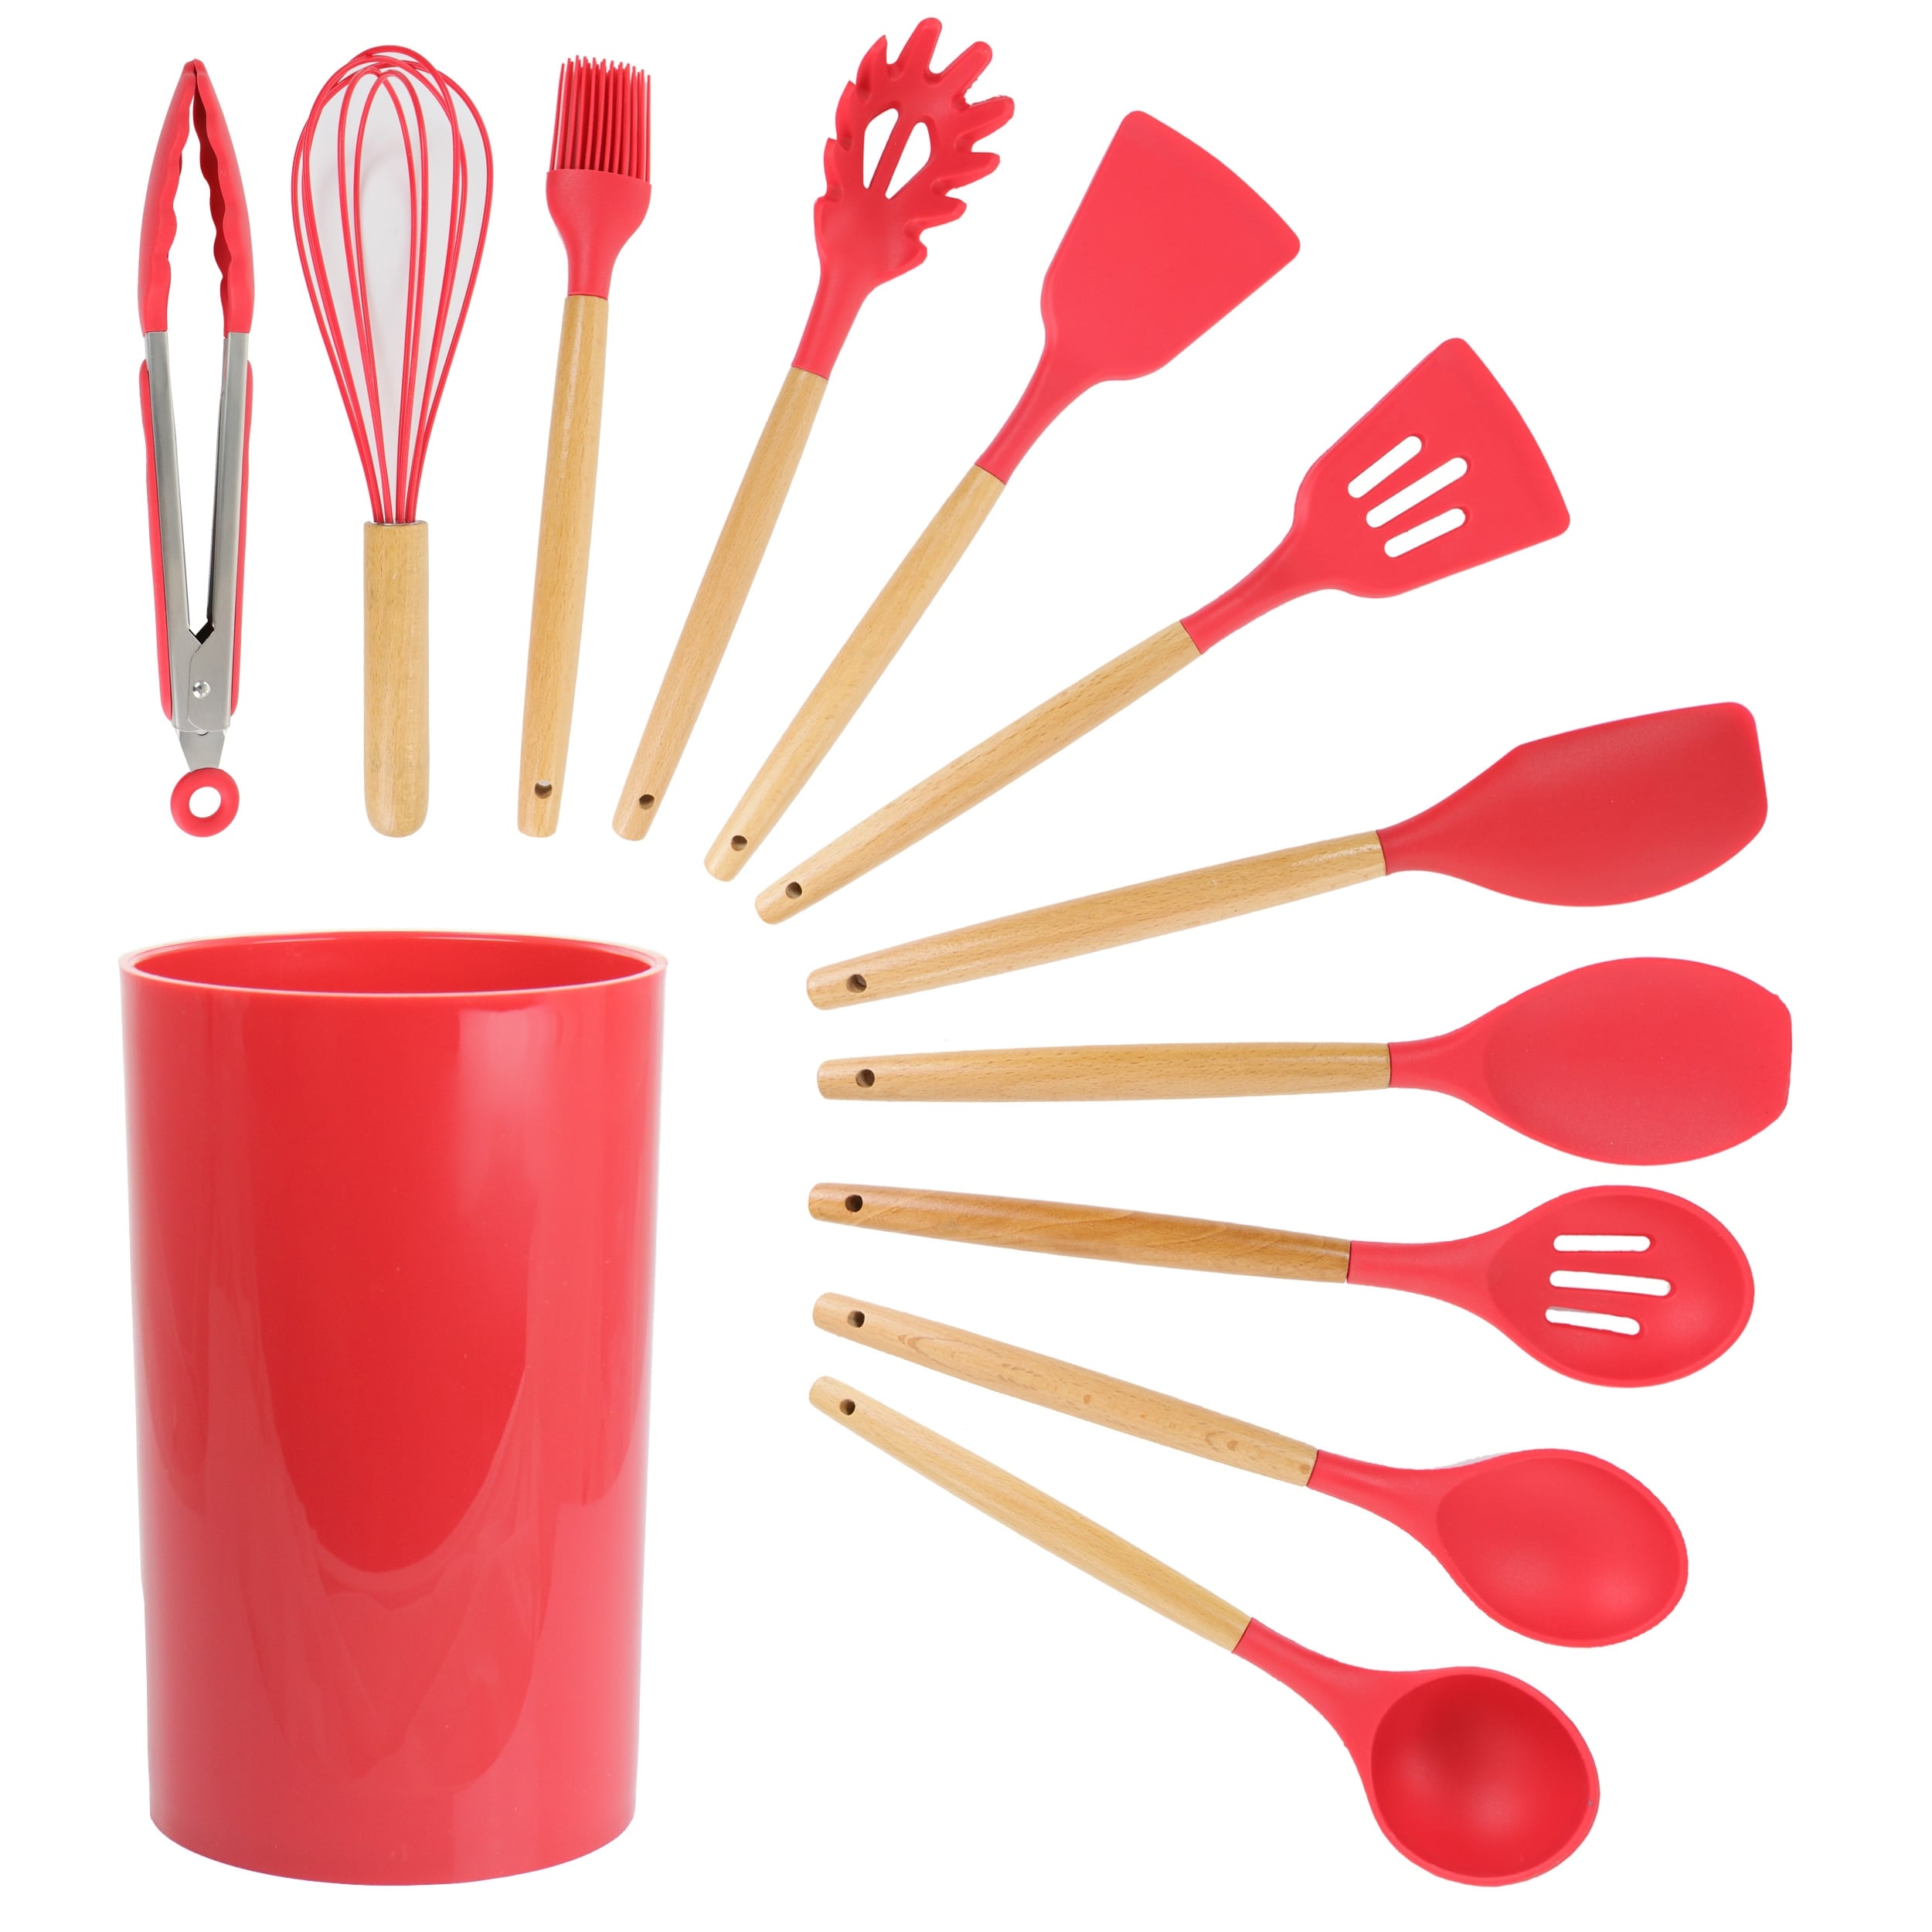 https://ak1.ostkcdn.com/images/products/is/images/direct/c3eb20e853dc7ff55e2f9adb726a43a5e0bd3109/12-Piece-Silicone-and-Wood-Cooking-Utensils-in-Cherry.jpg